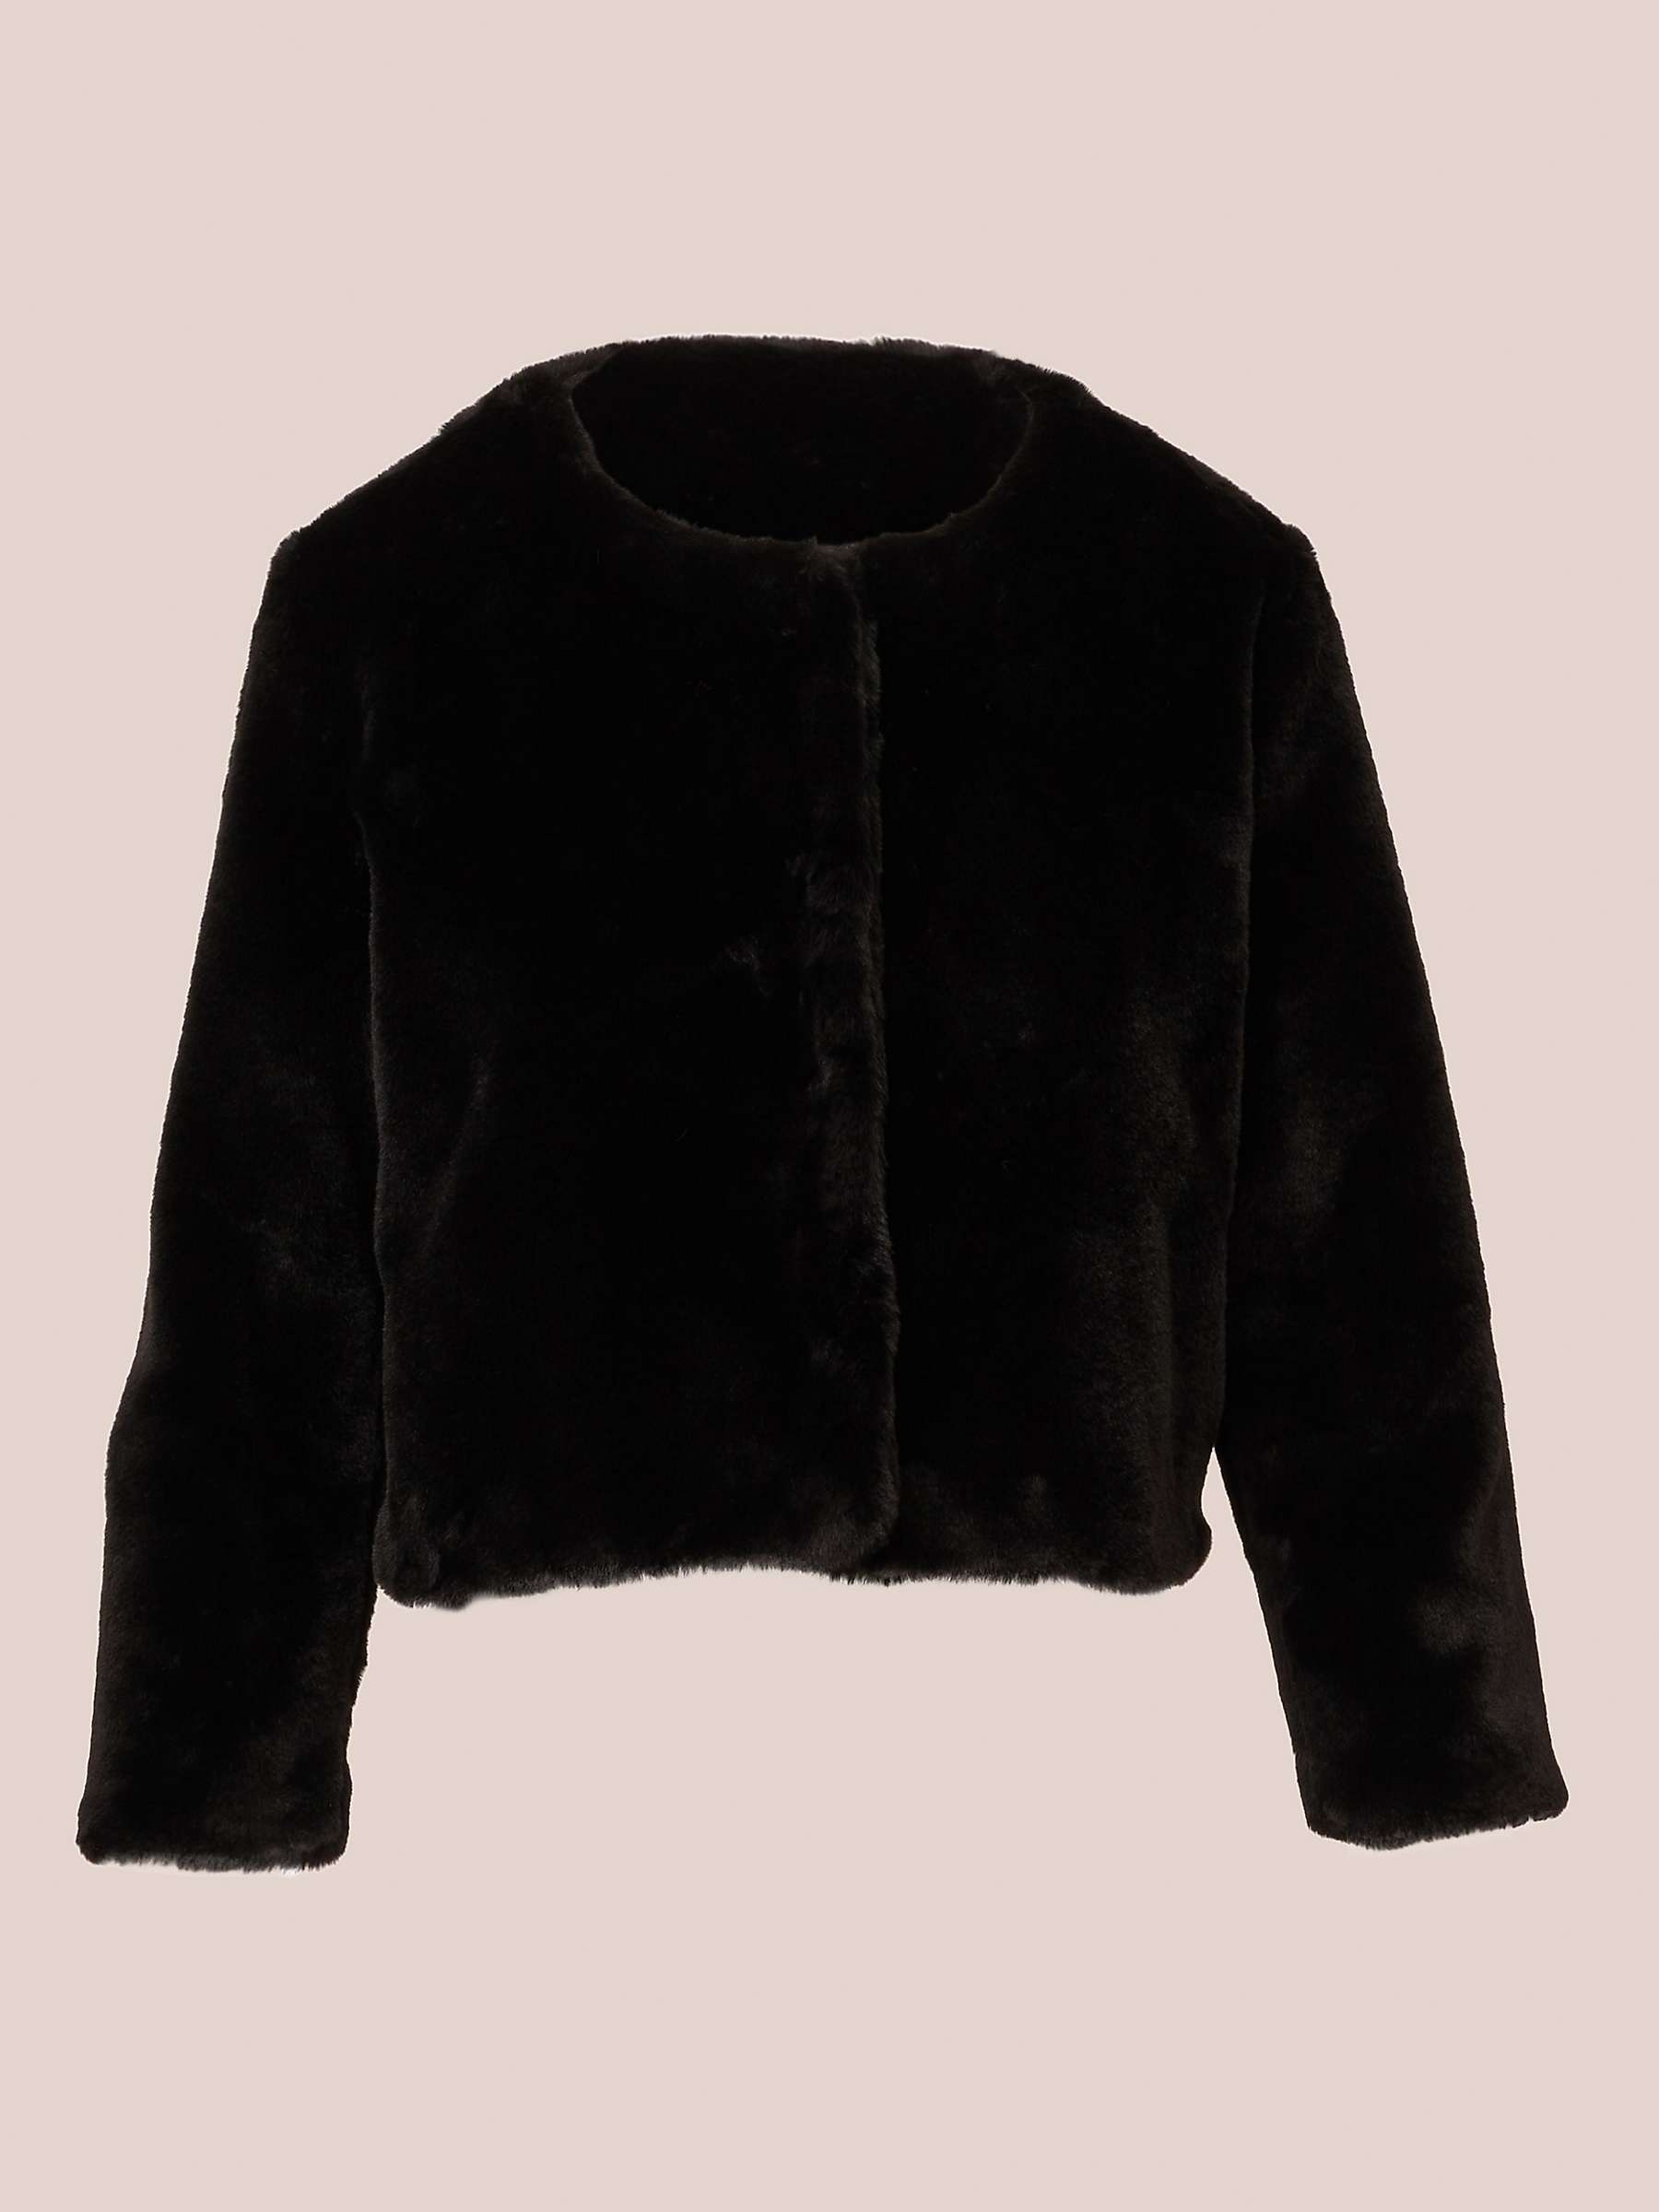 Buy Adrianna Papell 3/4 Sleeve Faux Fur Jacket, Black Online at johnlewis.com